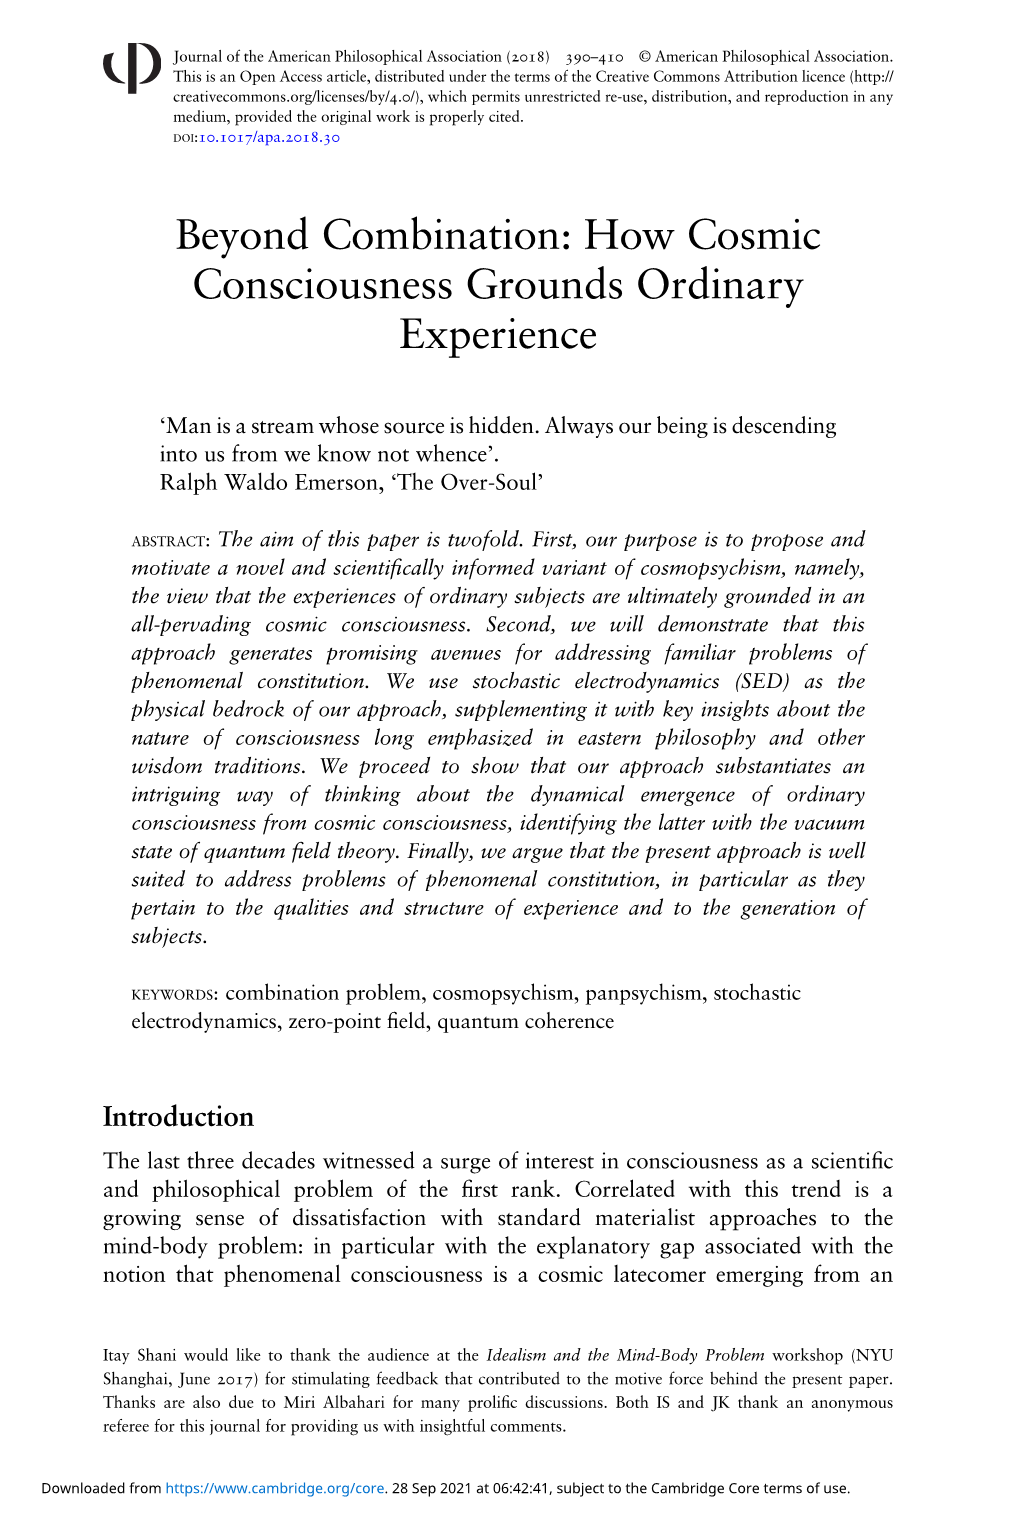 How Cosmic Consciousness Grounds Ordinary Experience